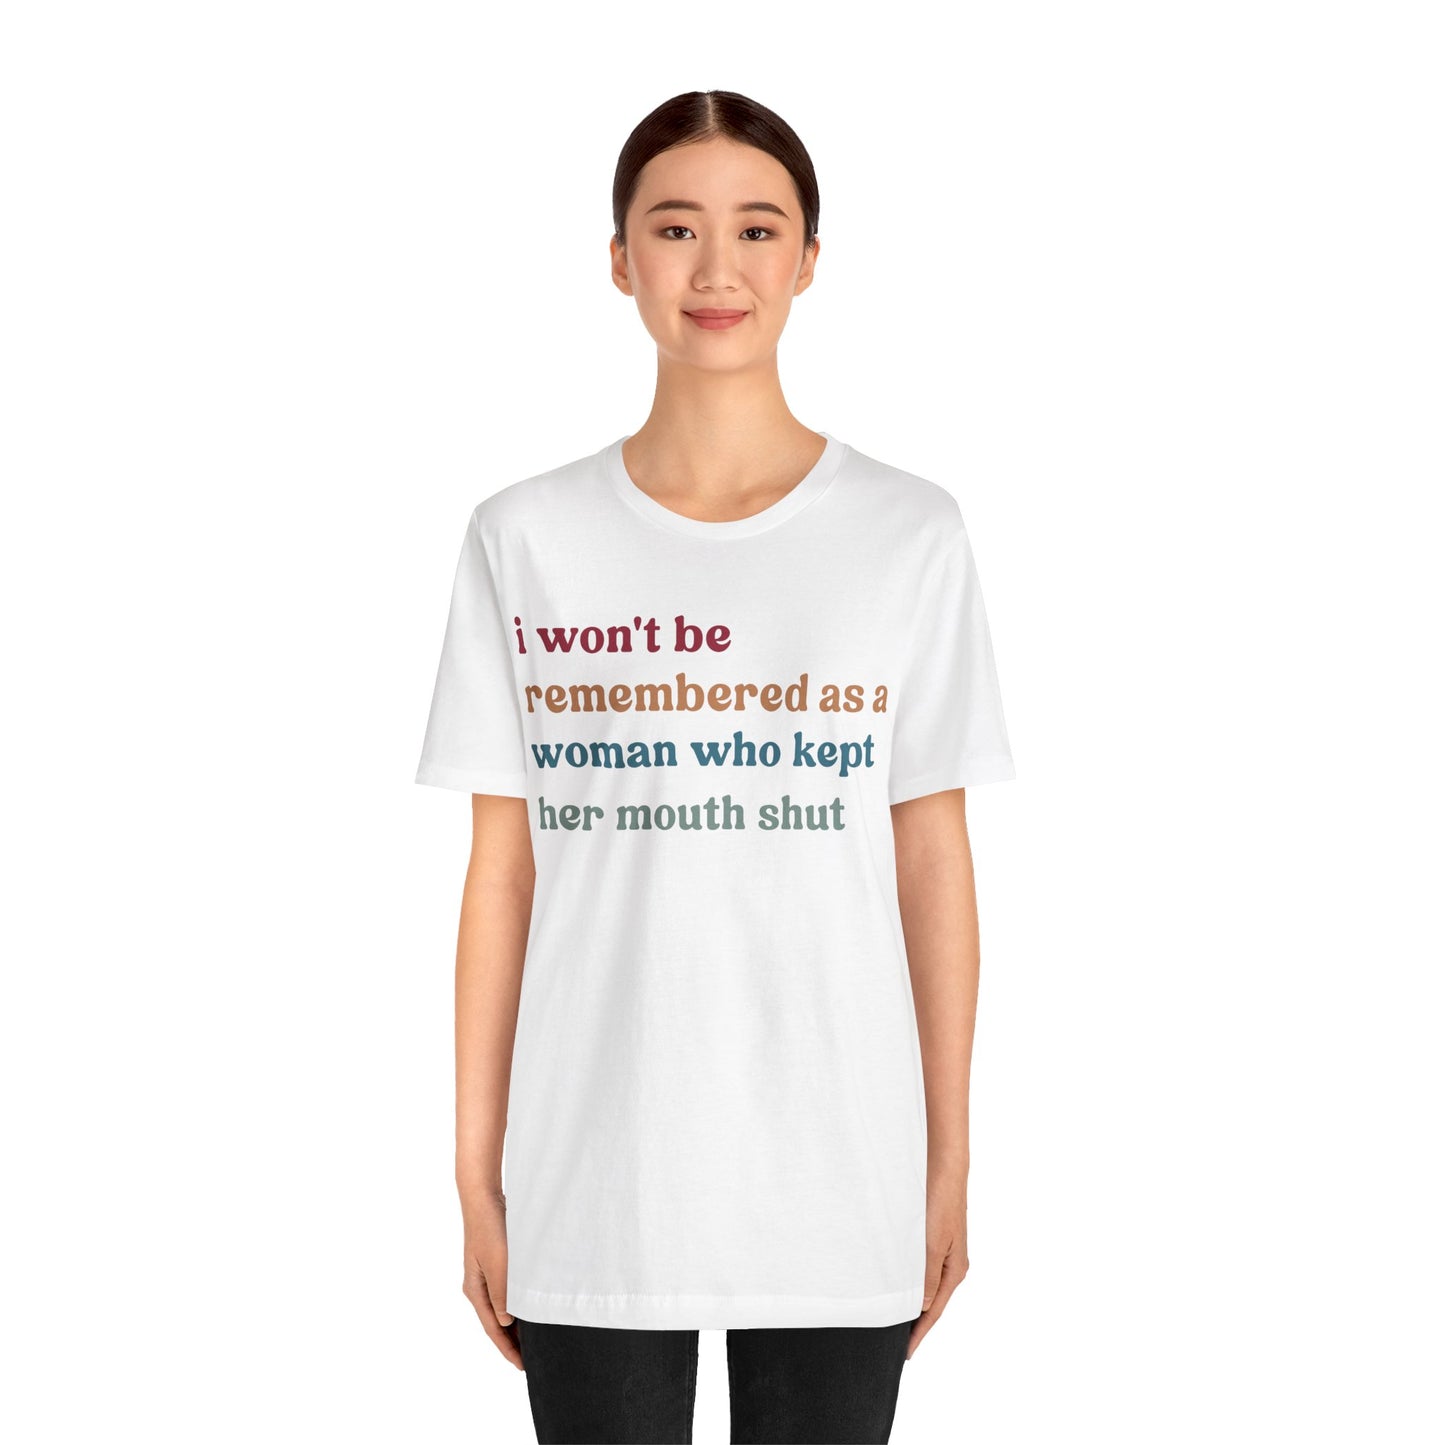 I Won't Be Remembered As A Woman Who Kept Her Mouth Shut Shirt, Feminist Shirt, Women Rights Equality, Women's Power Shirt, T1087